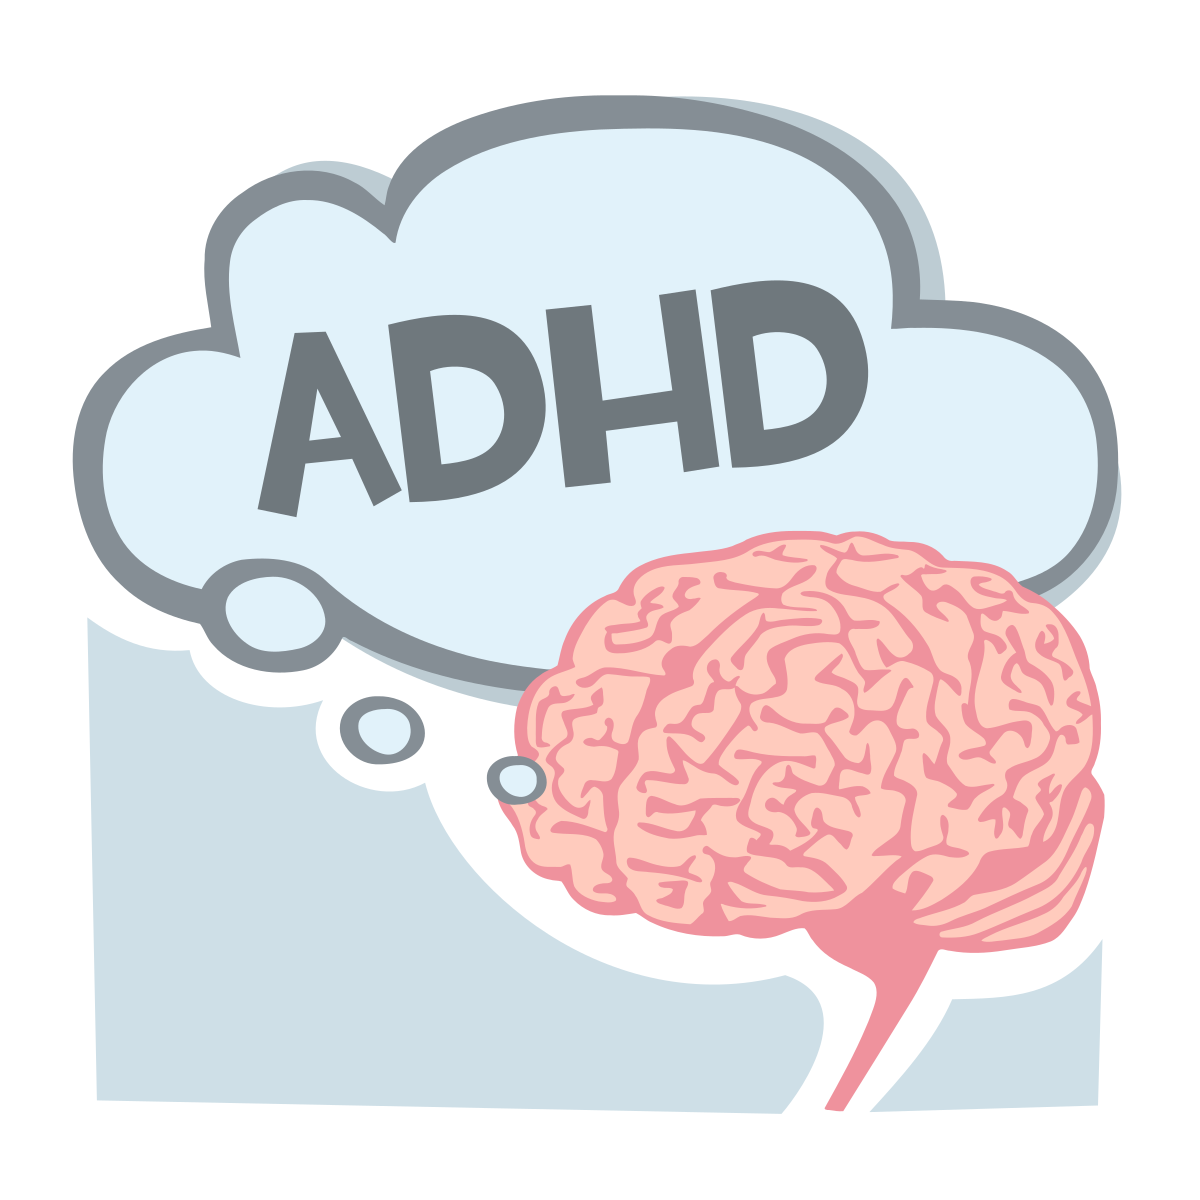 ADHD treatment without medication